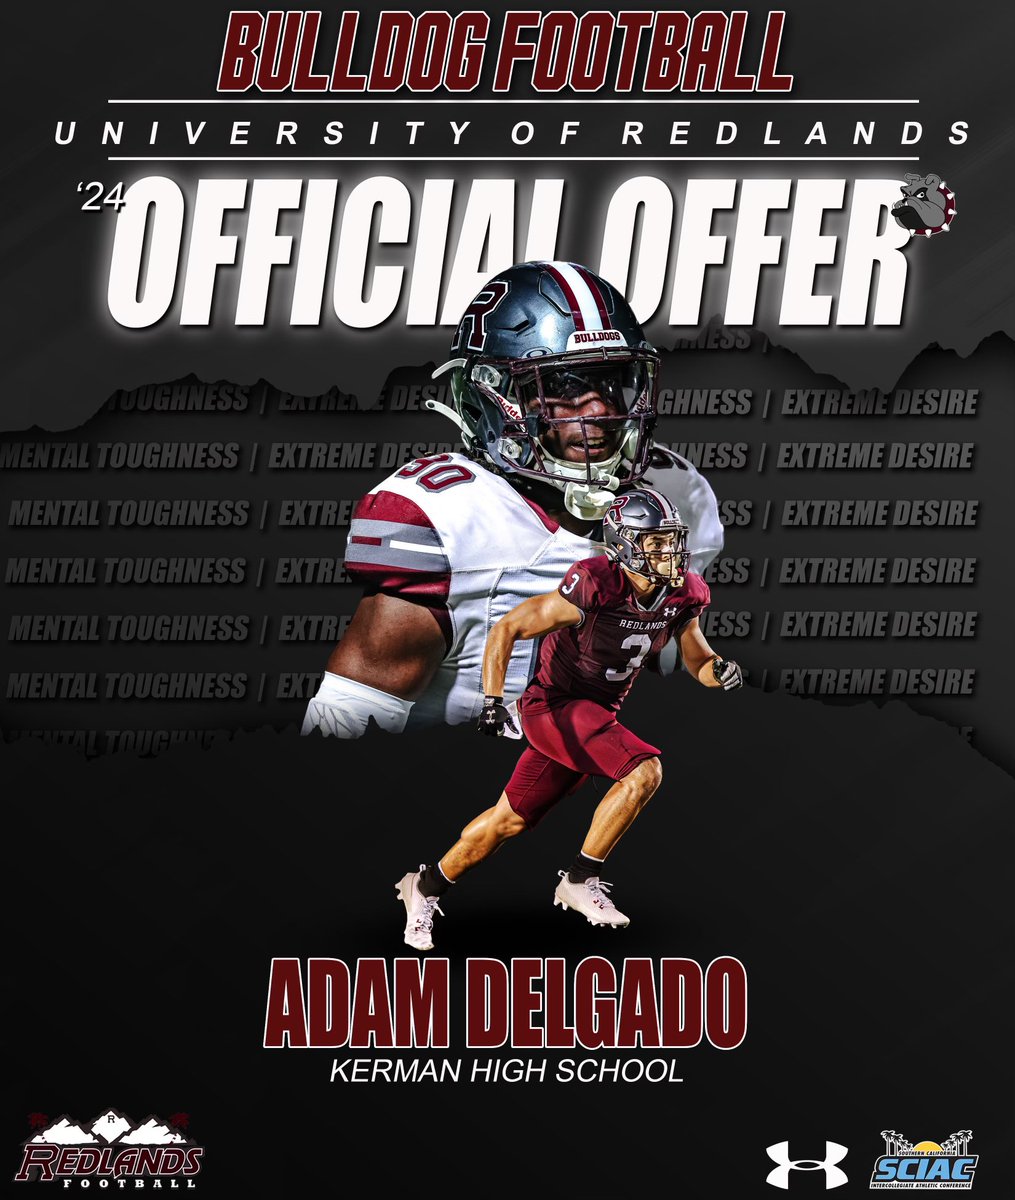 Excited to announce that I’ve received an offer from the University of Redlands! Thank you for this opportunity! @UR_CoachBennett @CoachMMMoore @KermanFootball